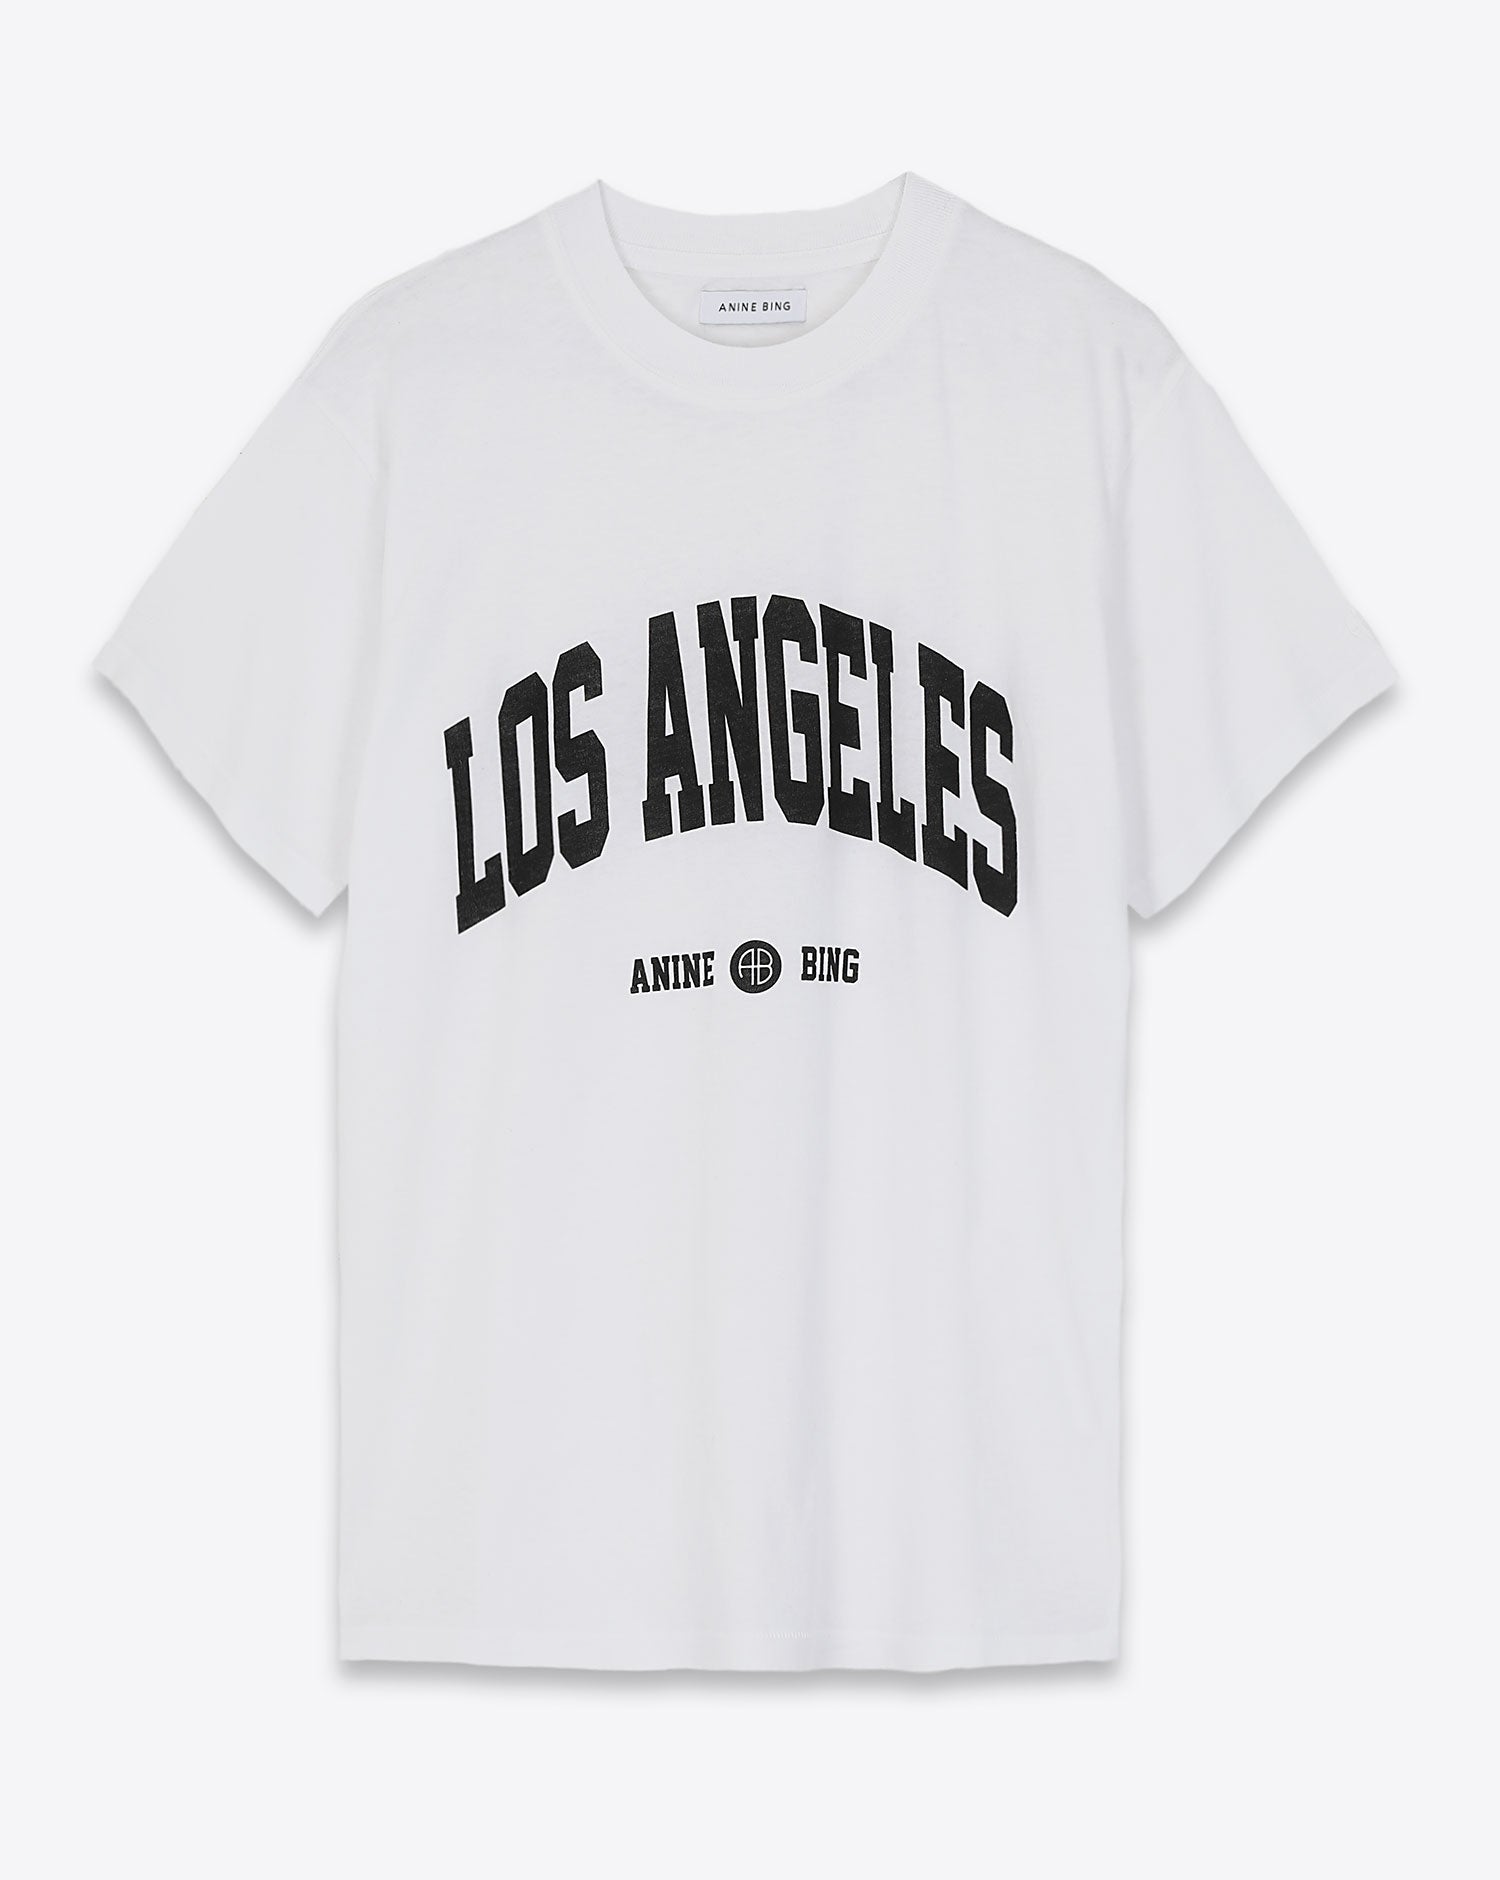 Los Angeles Lilli T-Shirt in White